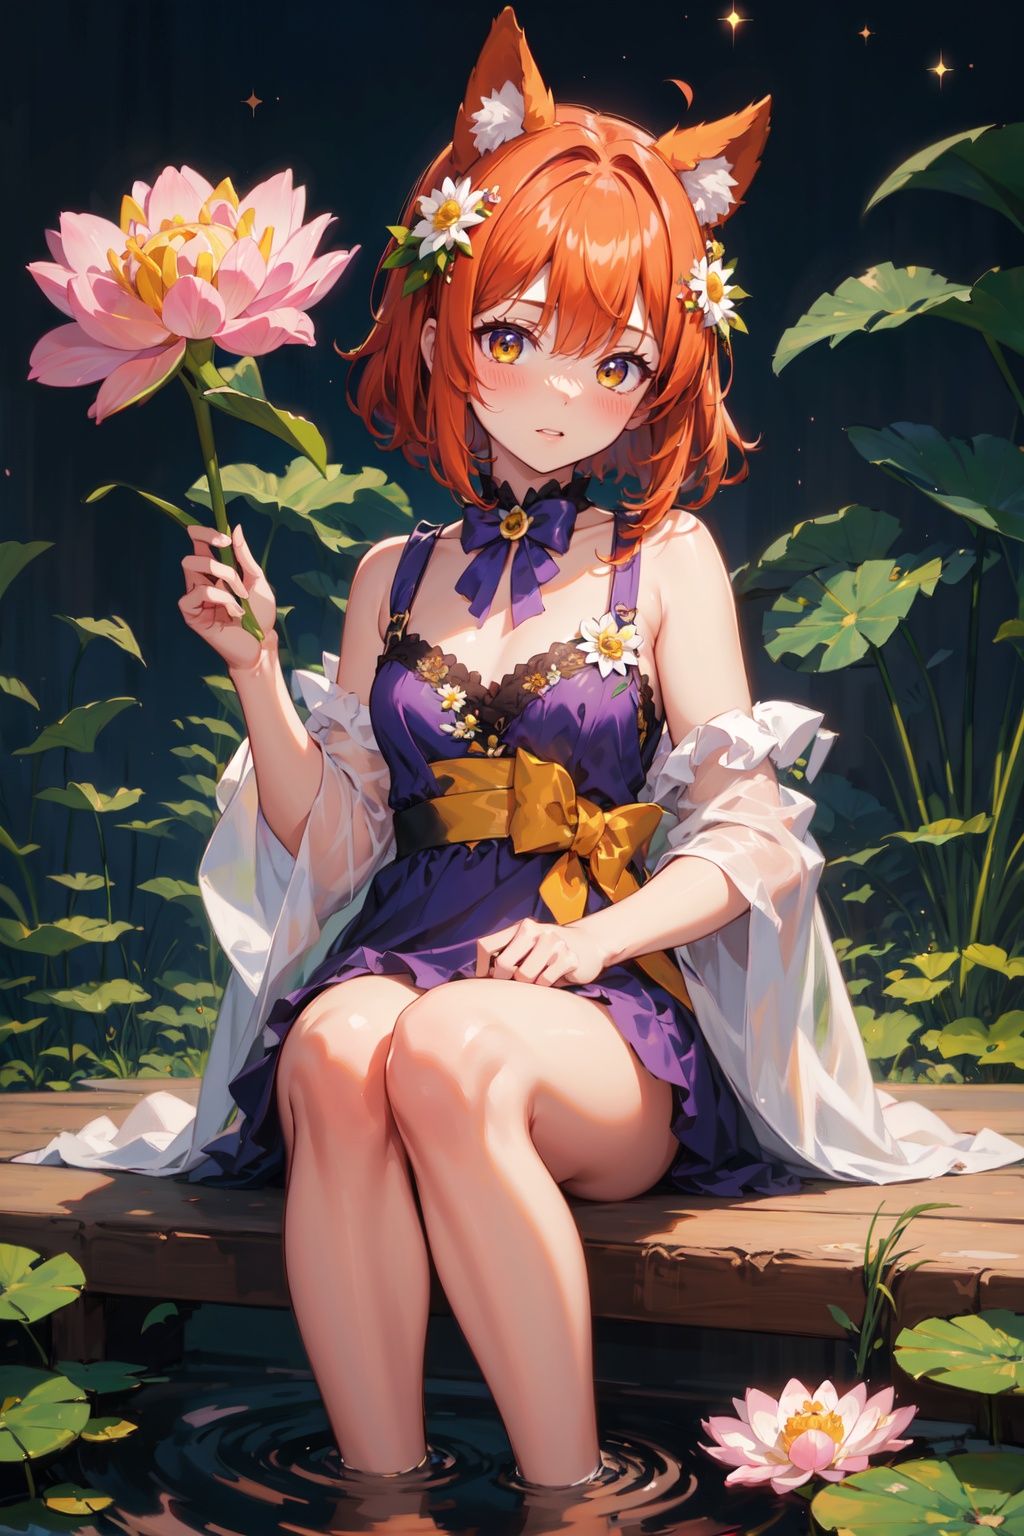 Best quality, masterpiece, best quality,masterpiece,1girl, animal ears, bangs, bare shoulders, blush, daisy, floral background, flower, hair flower, hair ornament, holding flower, leaf, lily \(flower\), lily pad, looking at viewer, lotus, orange flower, pink flower, solo, sparkle, white flower, yellow flower
